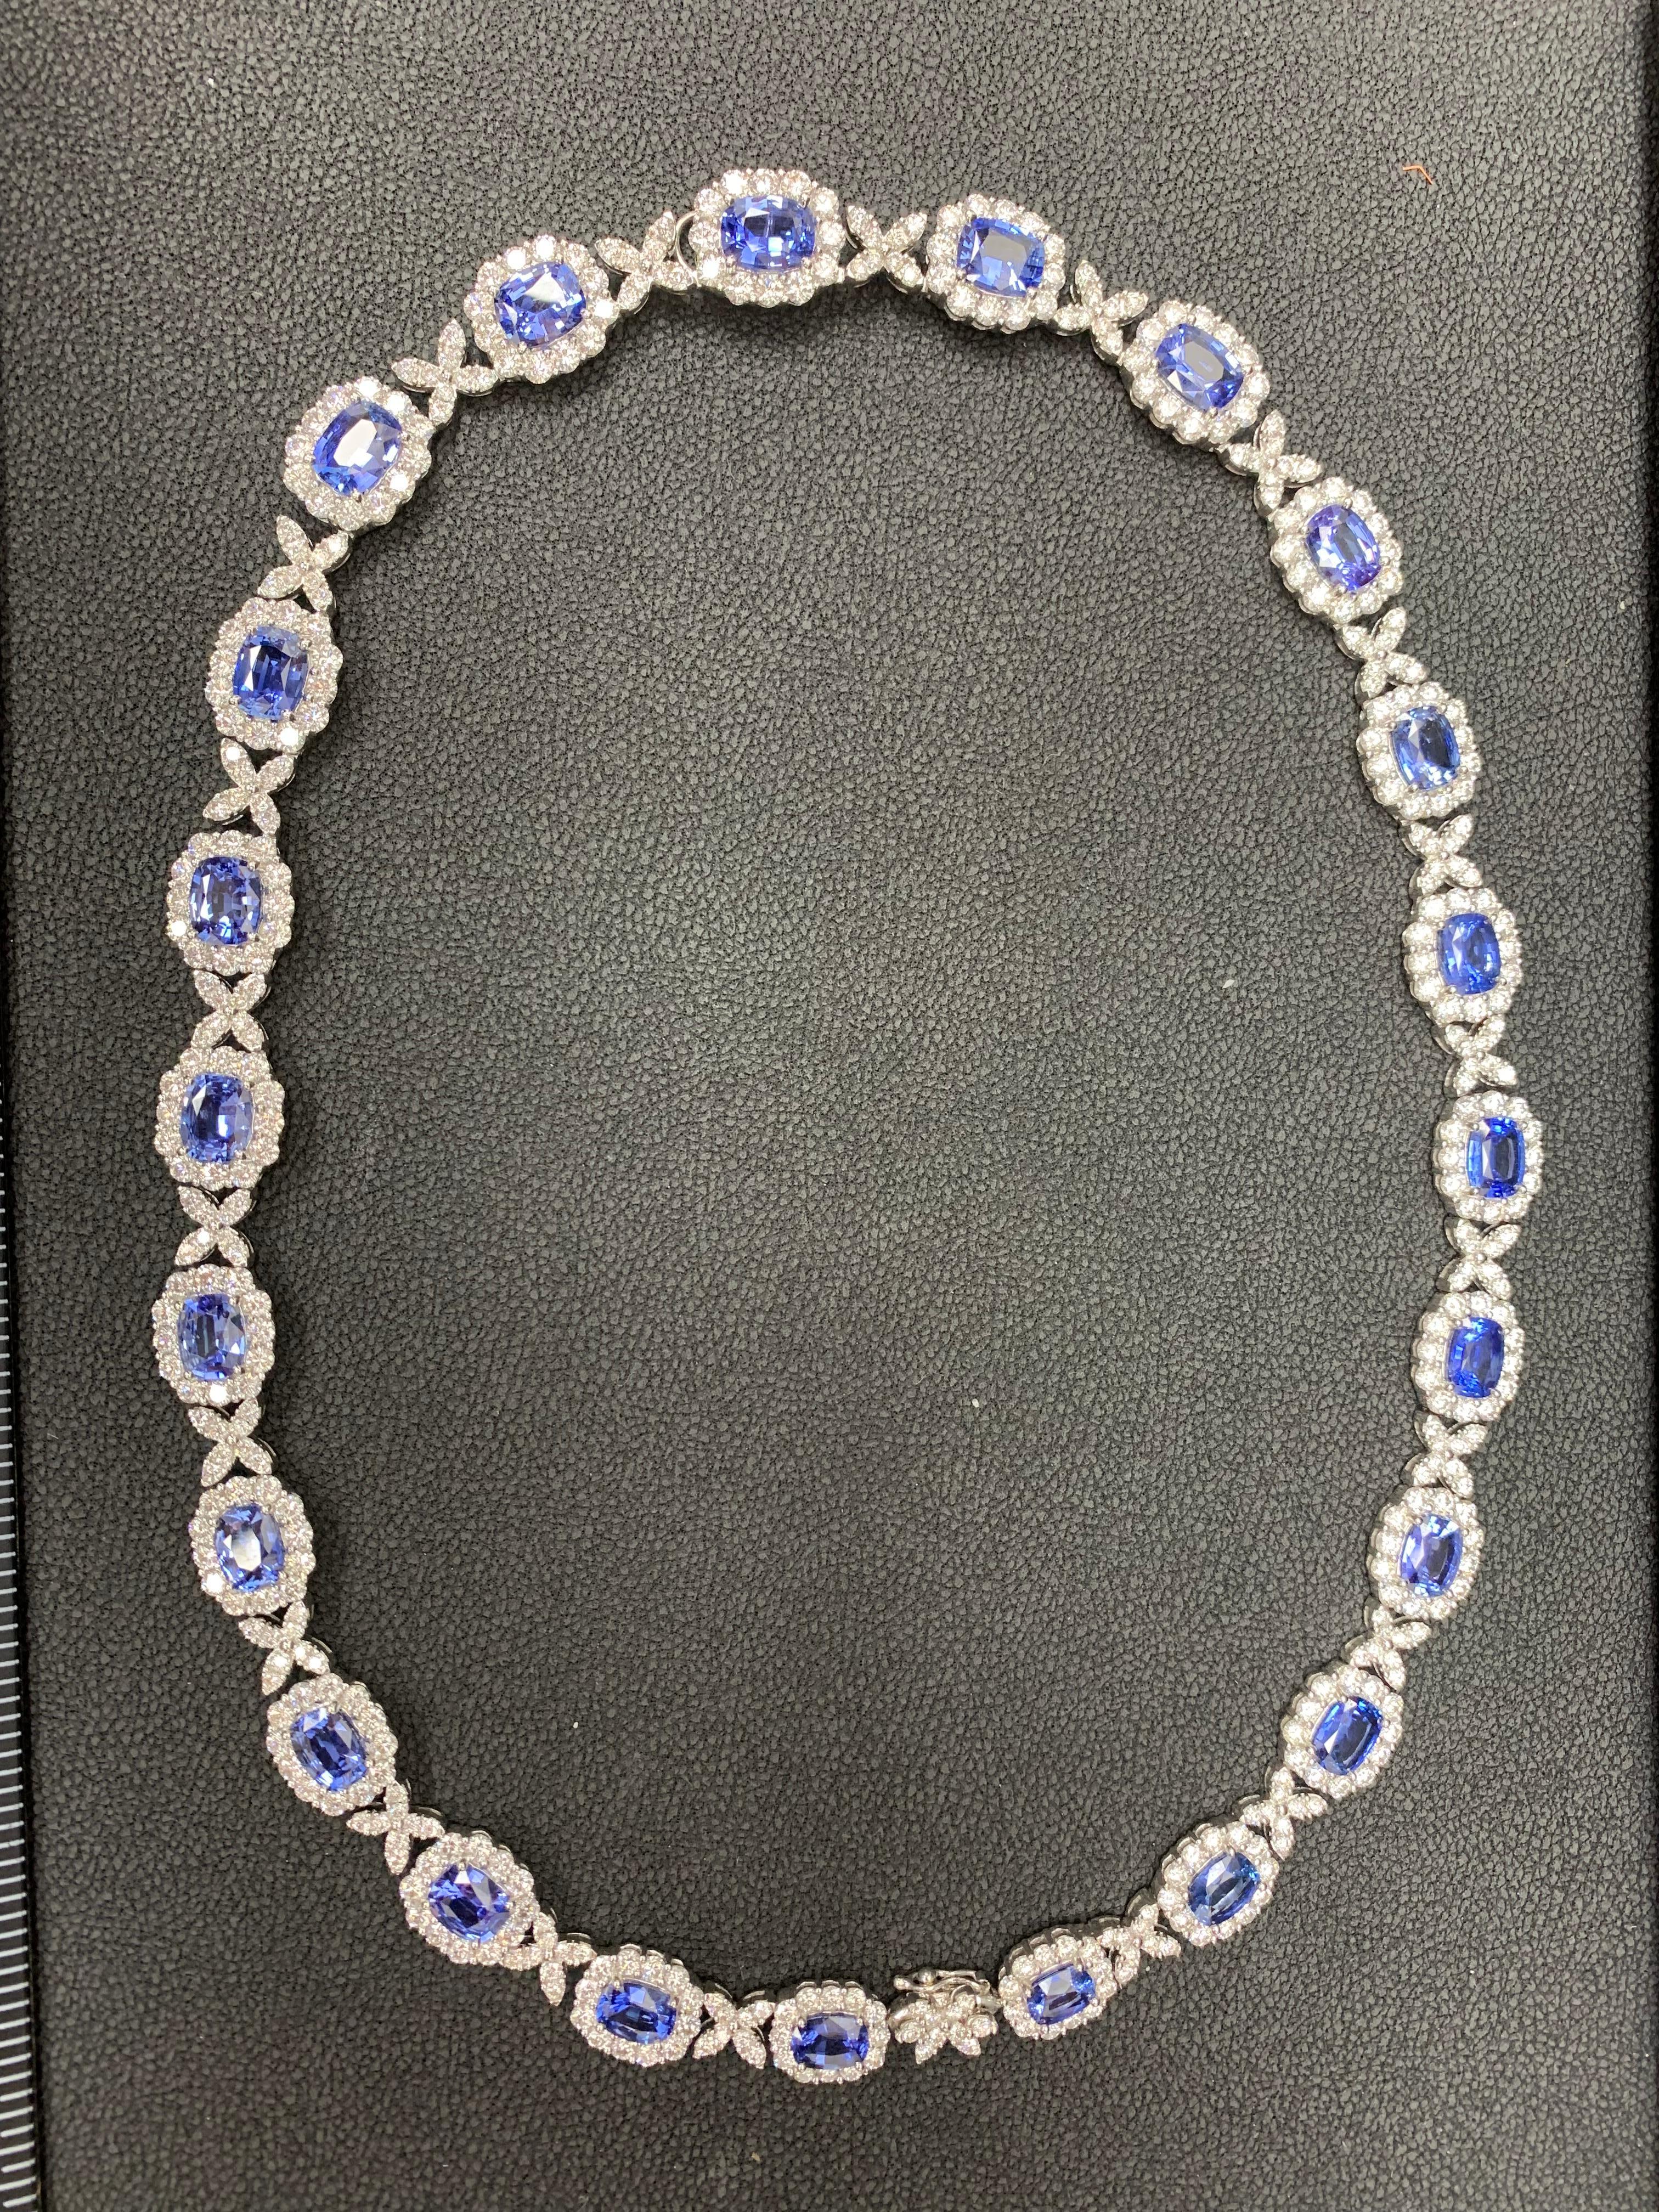 32.91 Carat Oval Cut Sapphire and Diamond Drop Necklace in 18K White Gold For Sale 8